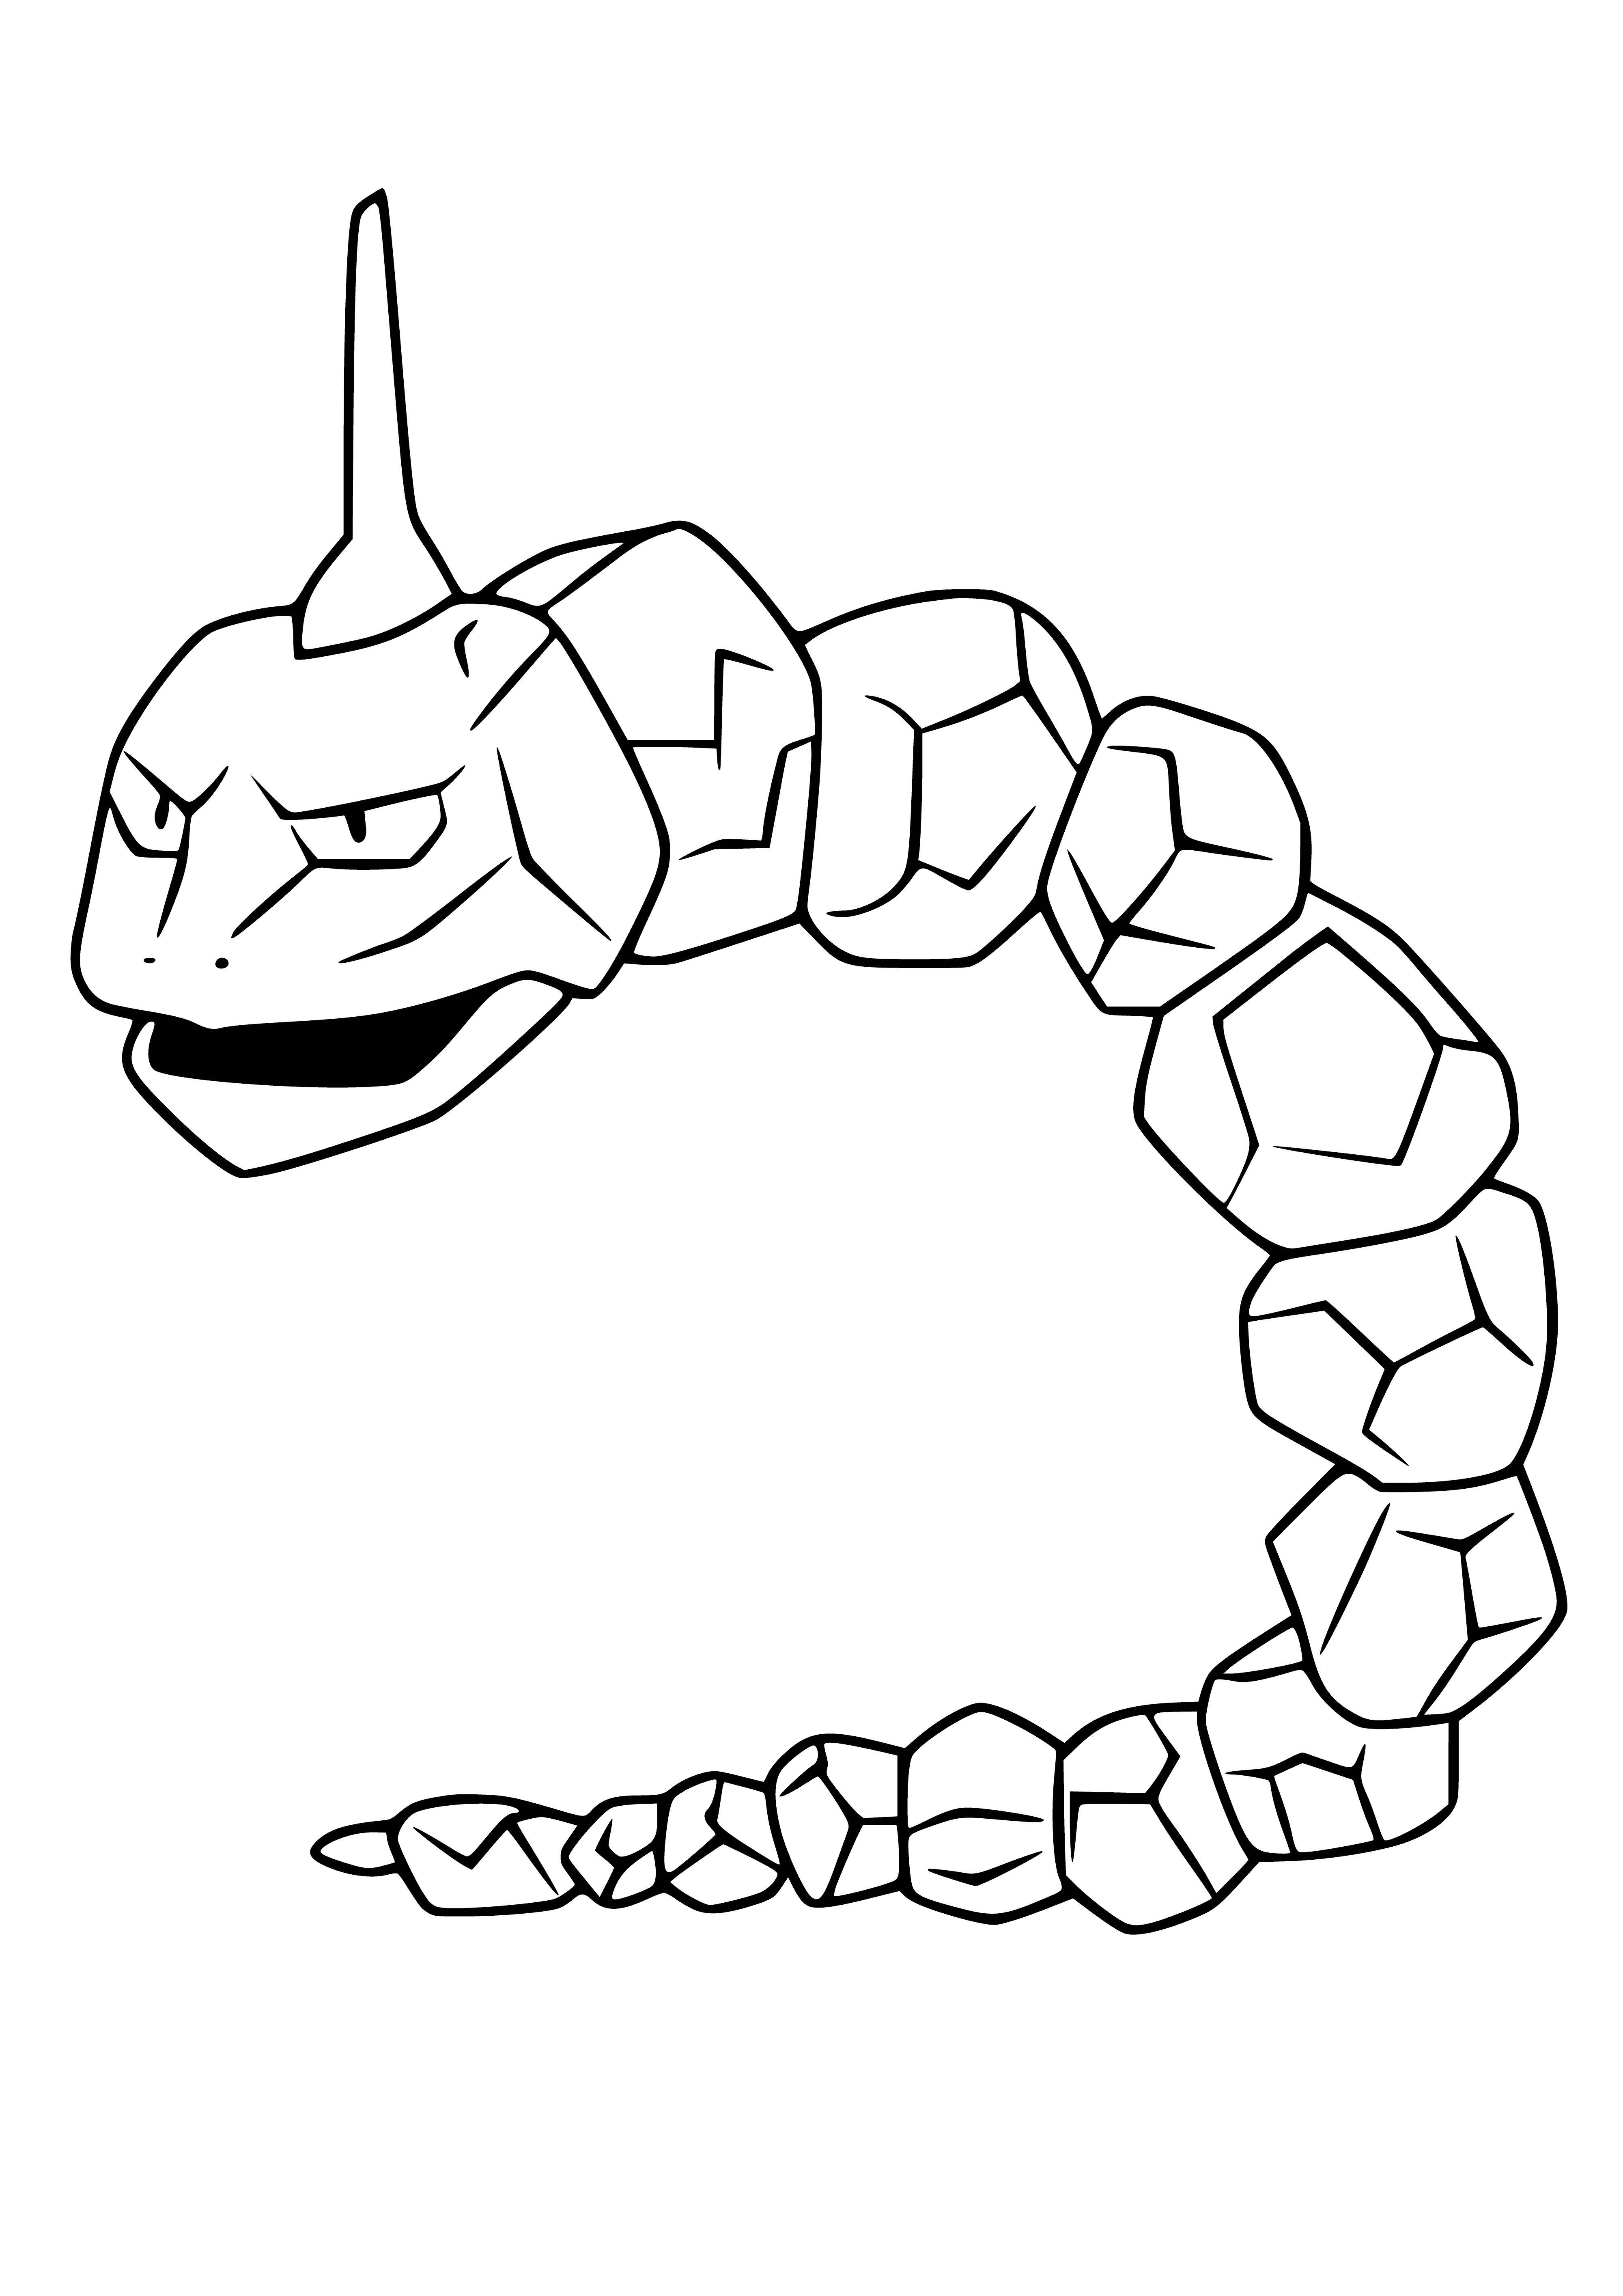 coloring page: Onyx, rock type Pokémon: Hard black stone body, red eyes, long thin tail. Strong and often used in battle. Can evolve into Steelix for greater power.